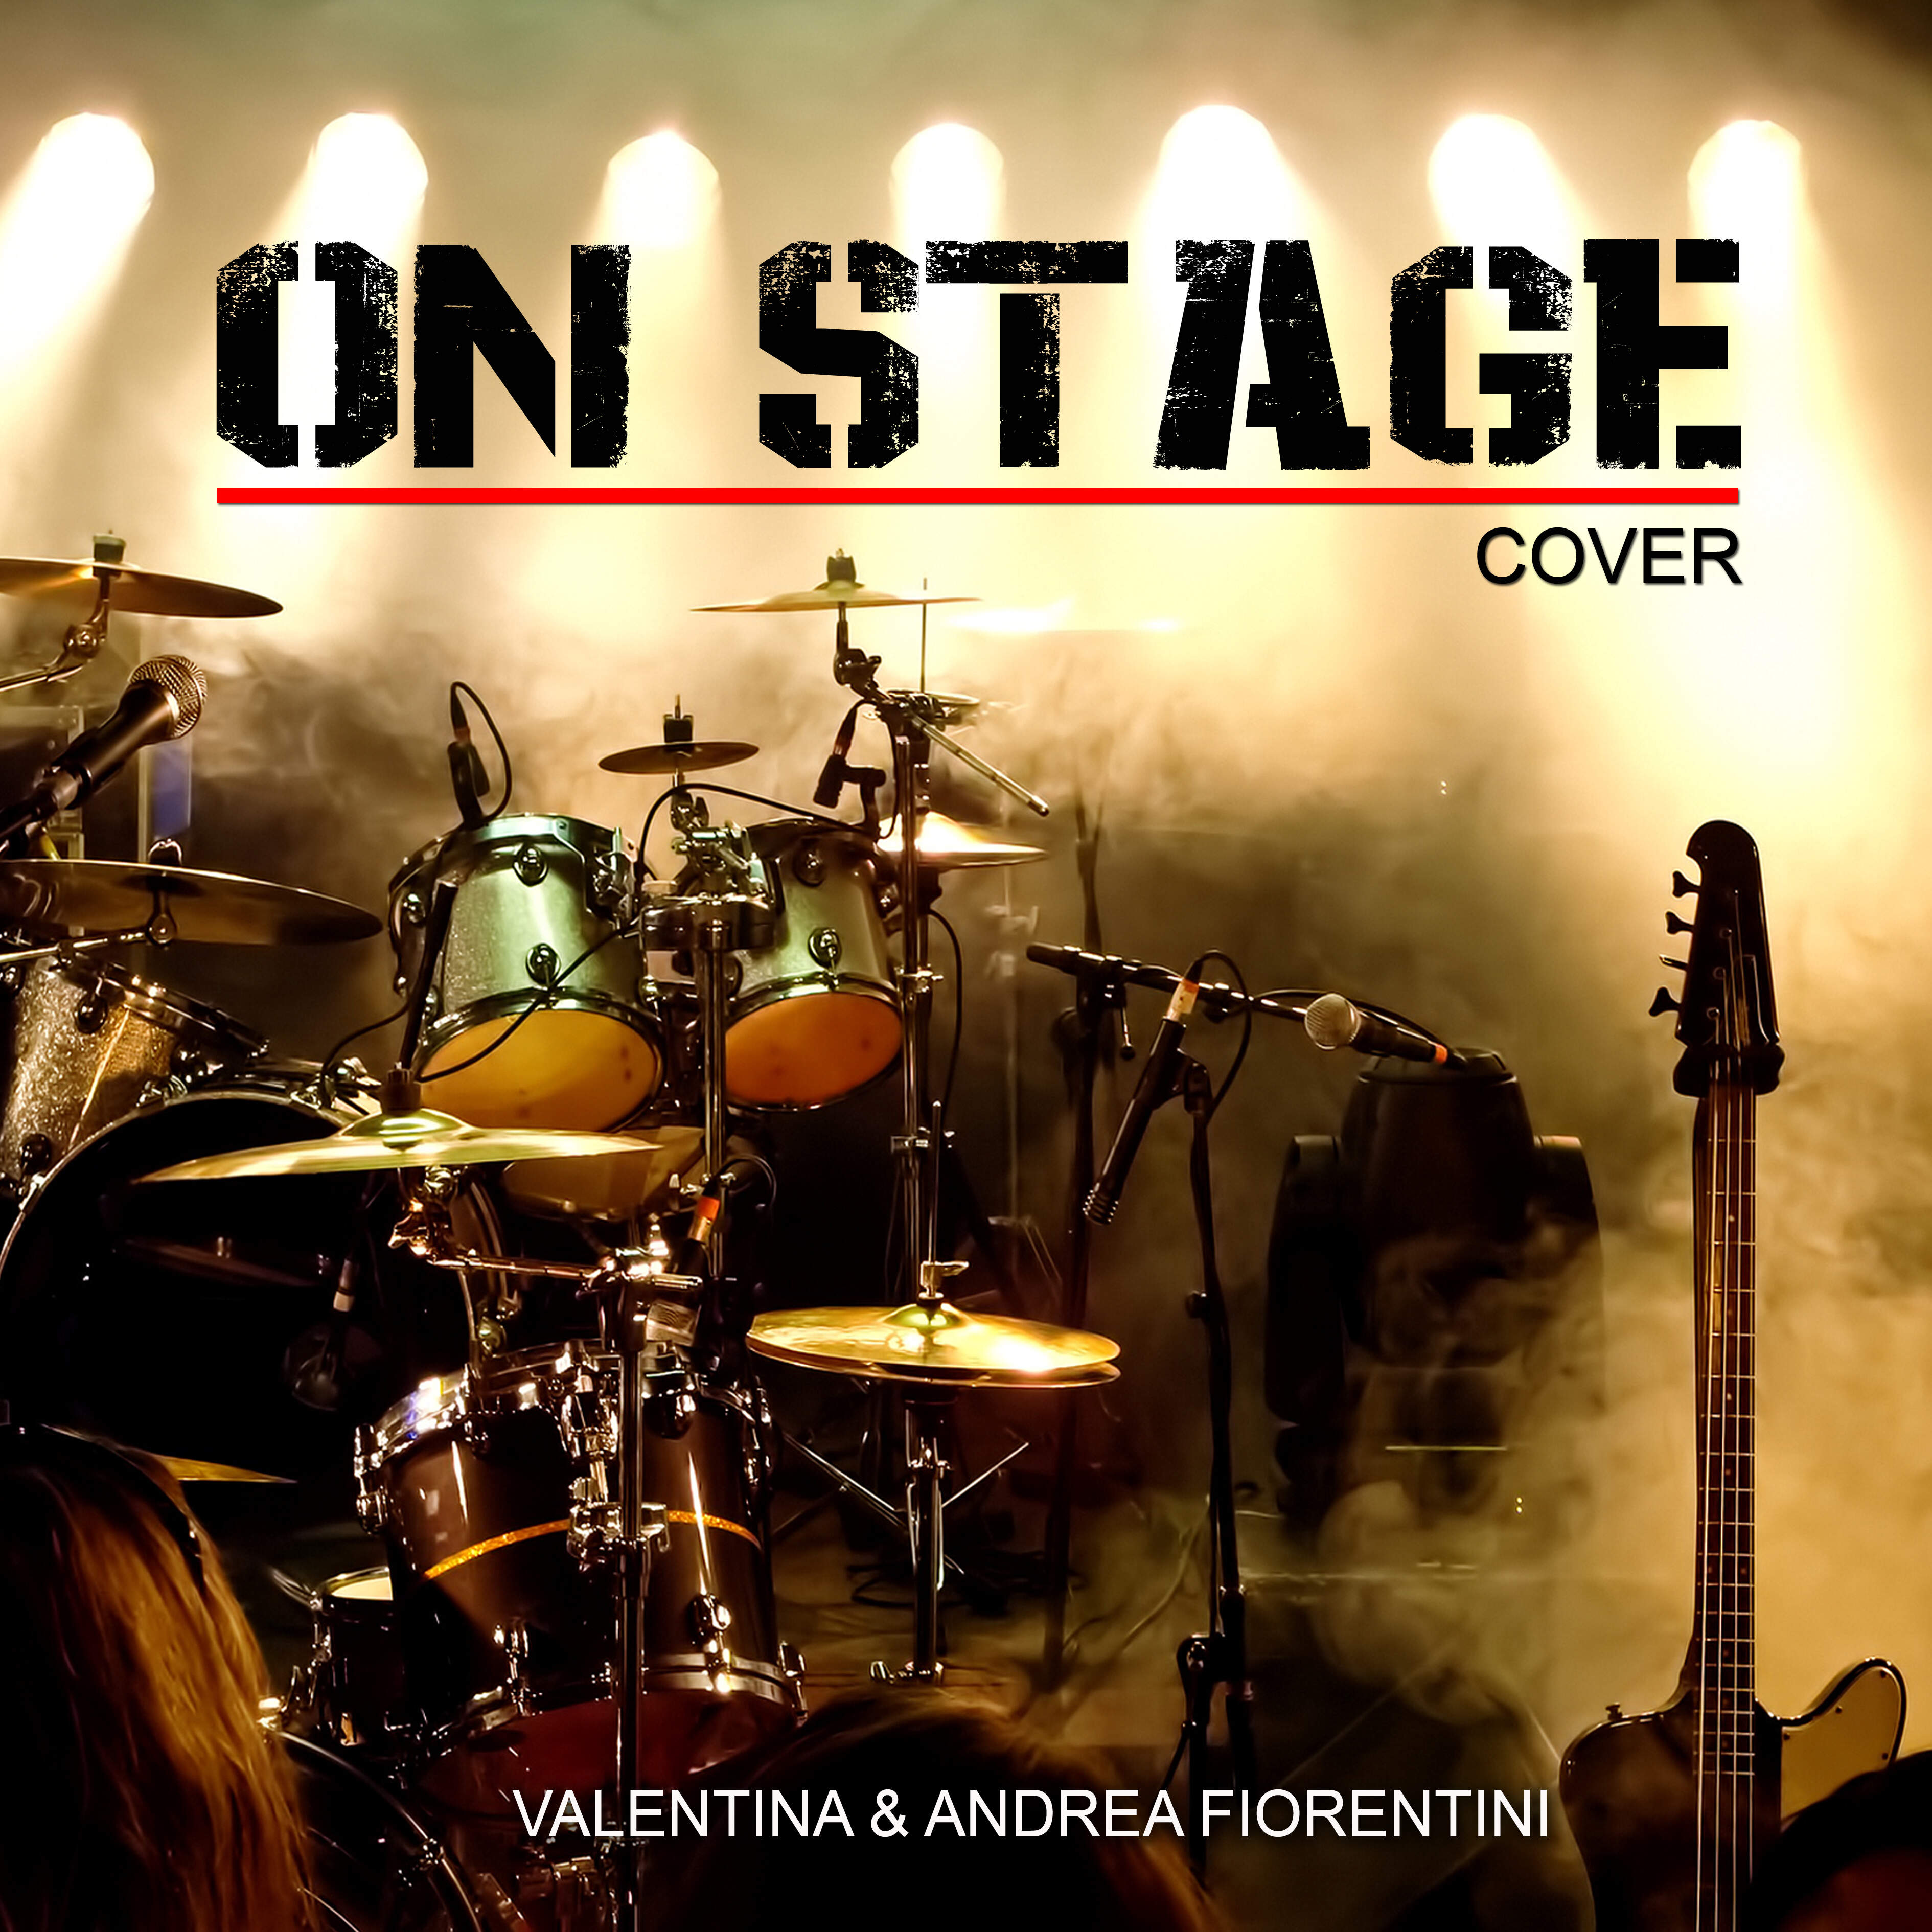 Cd "ON STAGE"